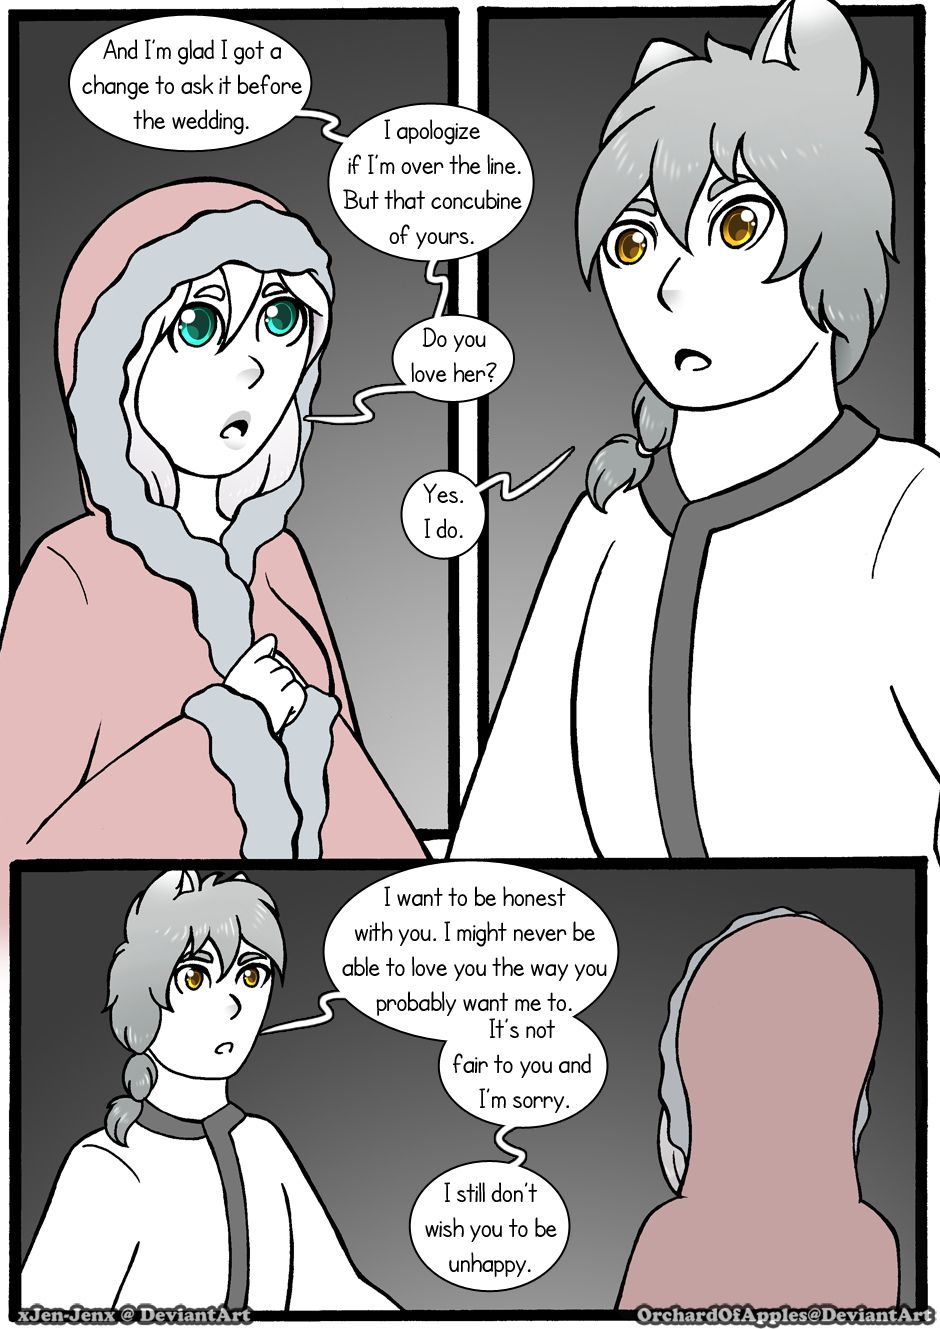 [Jeny-jen94] Between Kings and Queens [Ongoing] 239